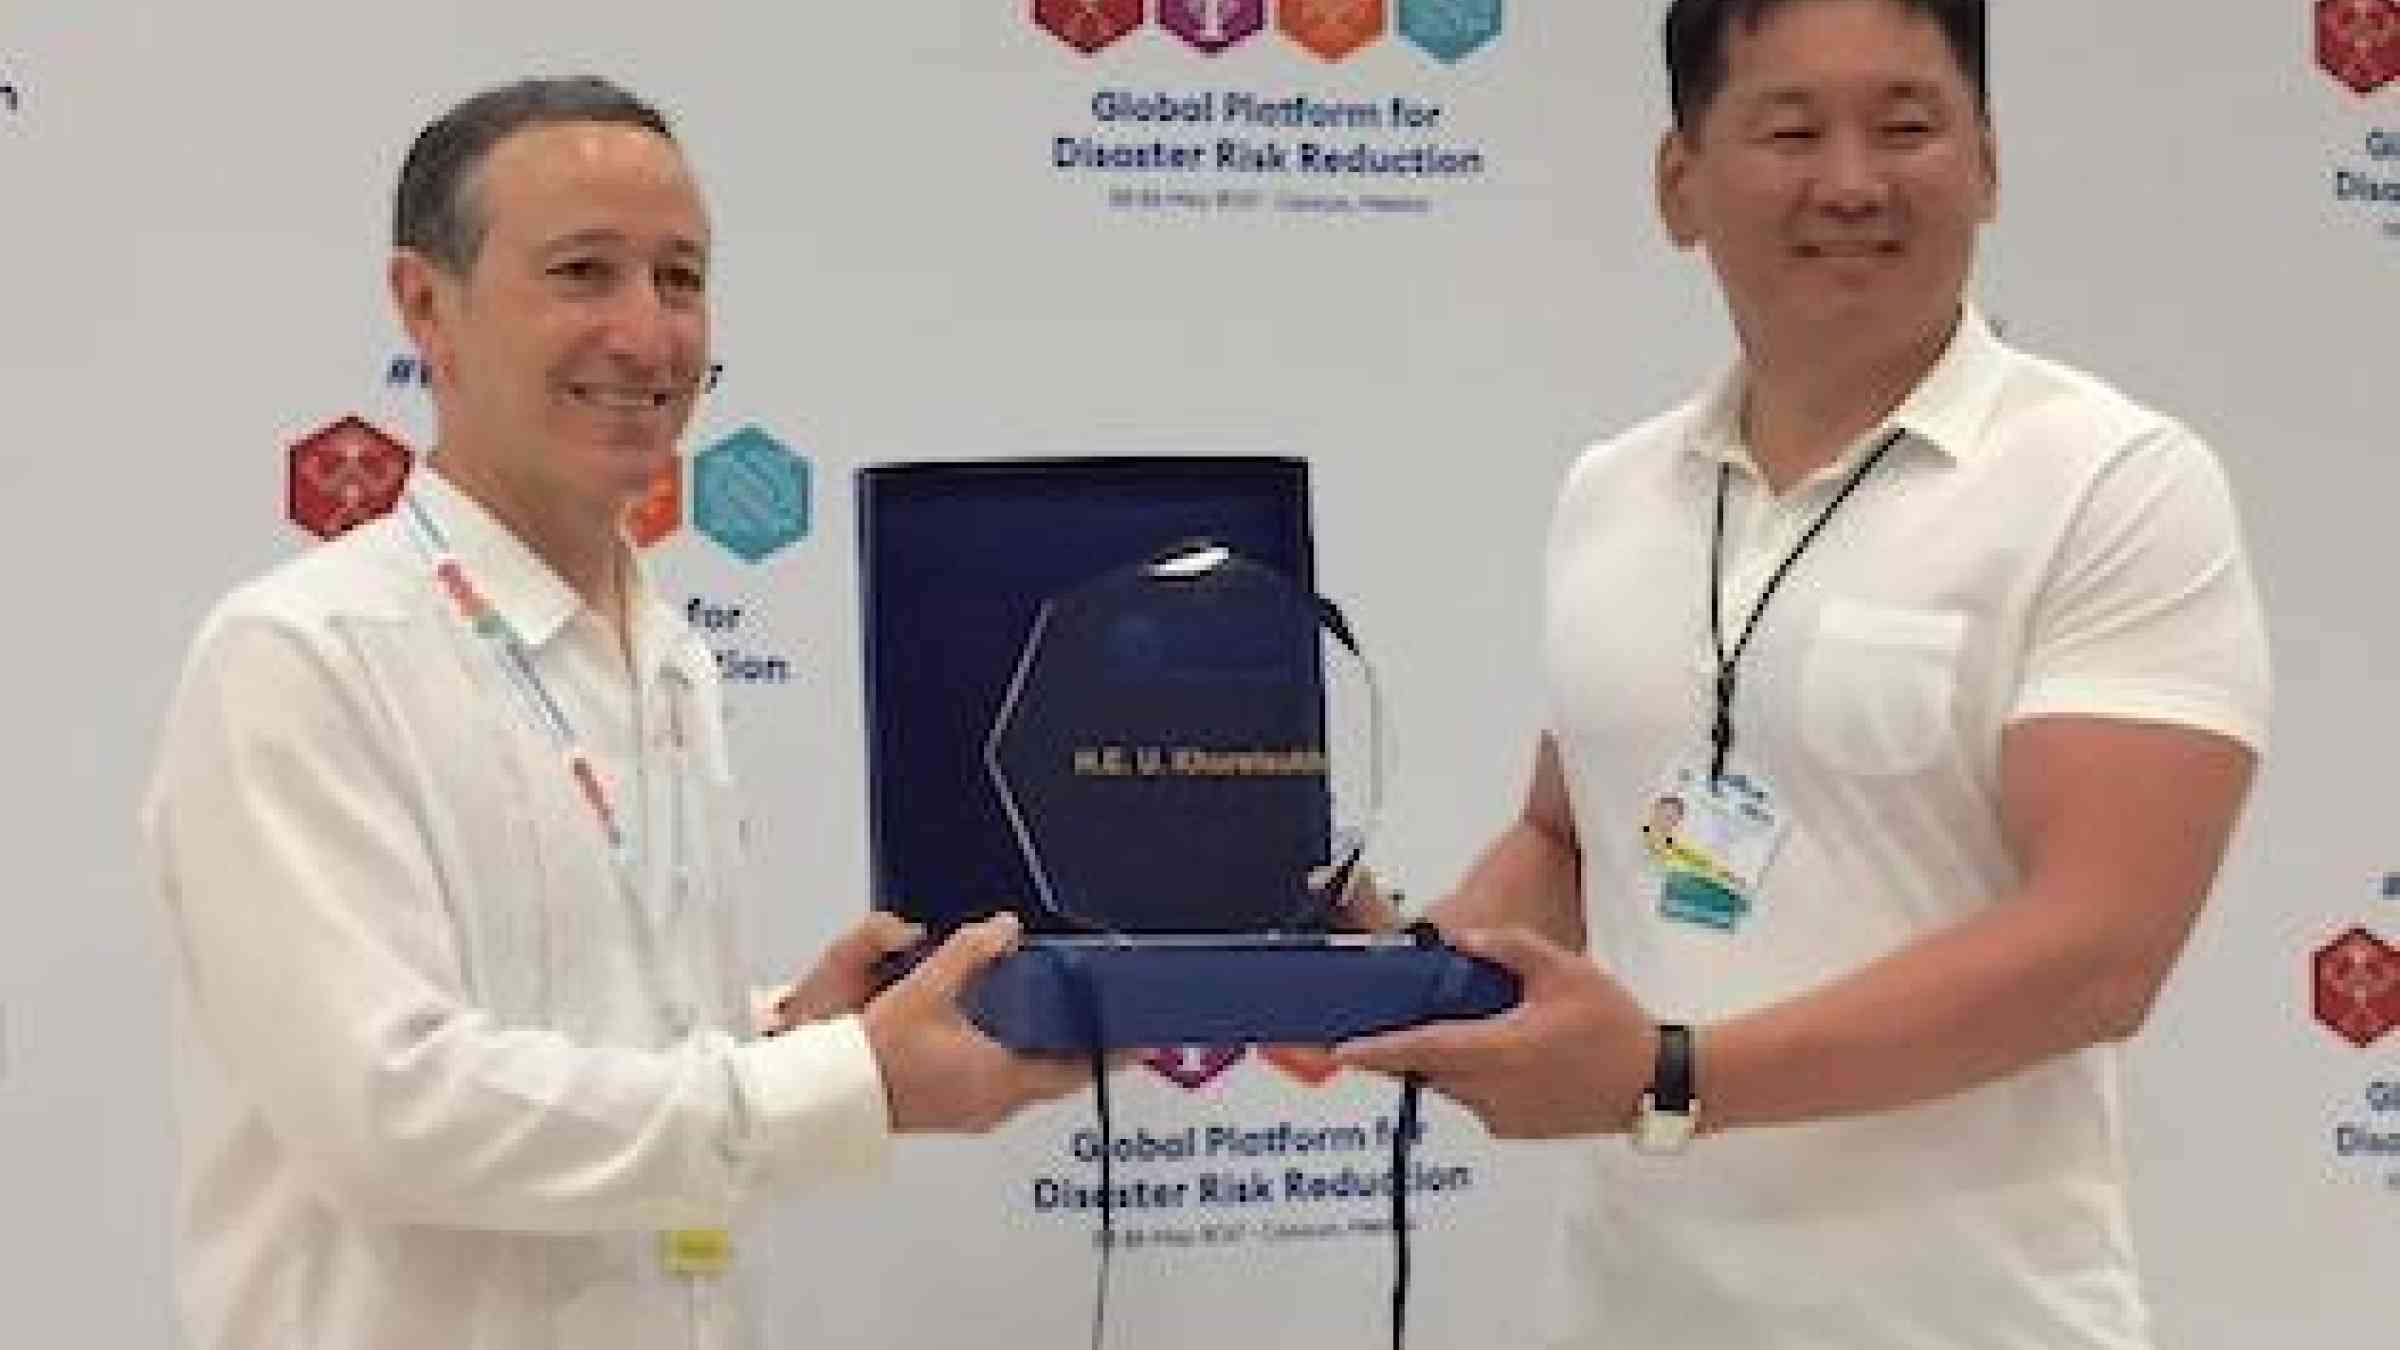 The Deputy Prime Minister of Mongolia, H.E. U. Khurelsukh (right) is recognized as Asian Champion for Disaster Risk Reduction by SRSG Mr Robert Glasser at the Global Platform 2017 in Mexico (Photo: UNISDR)